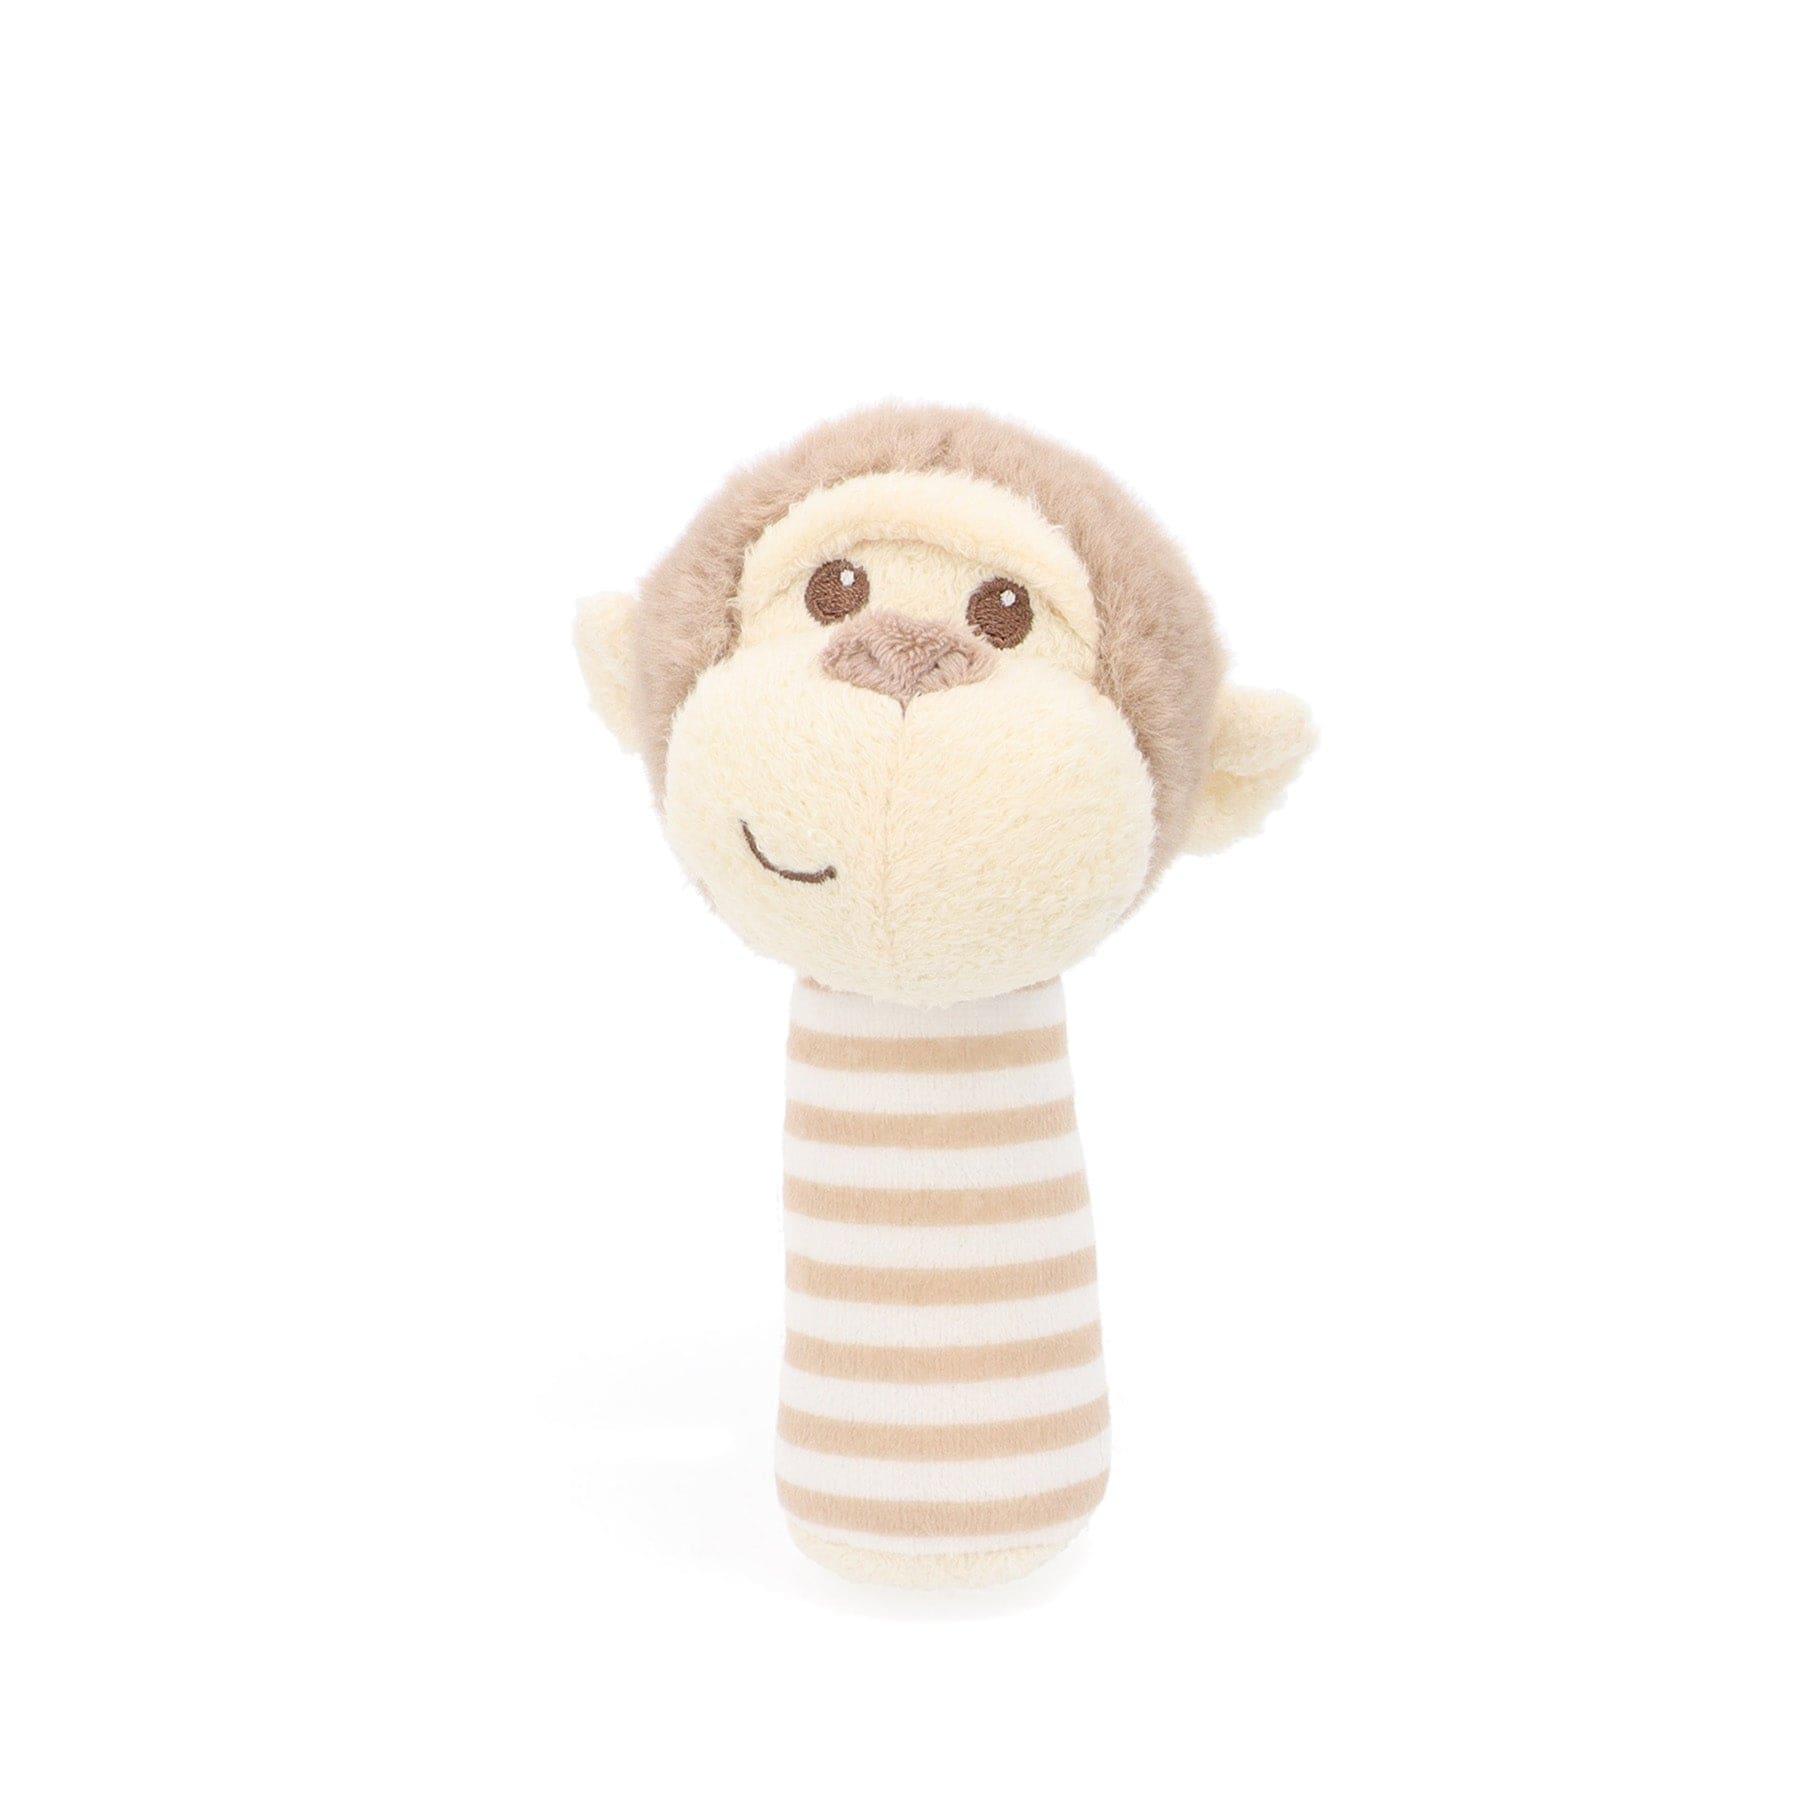 Plush monkey toy with beige and brown stripes, soft stuffed animal, cute monkey doll with smiling face, isolated on white background, children's teddy bear alternative, infant safe toy